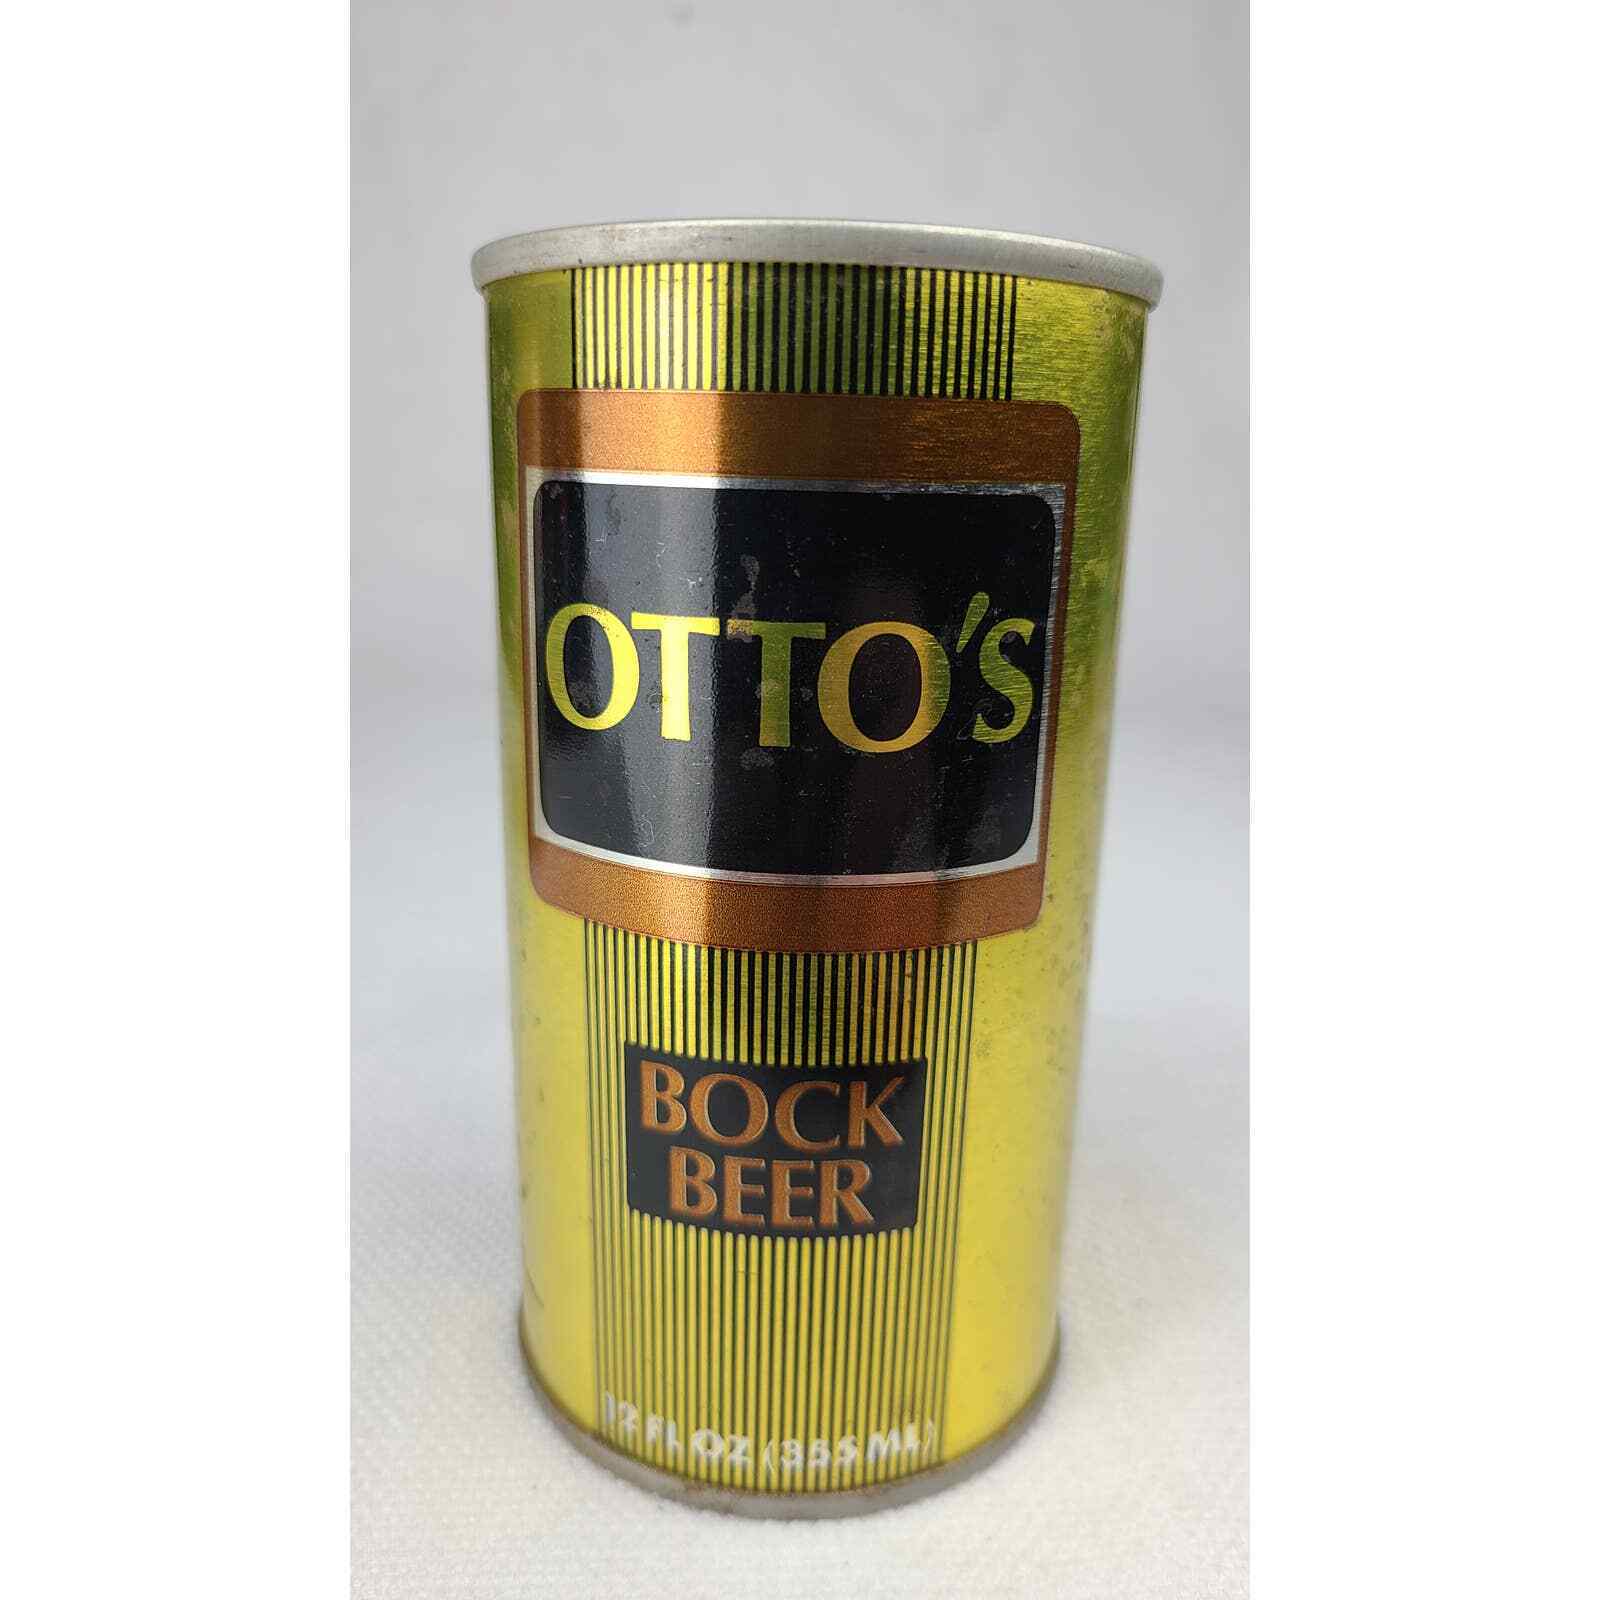 Otto's Bock Beer Walter Brewing Co Eau Clair WIS Pull Tab Beer Can